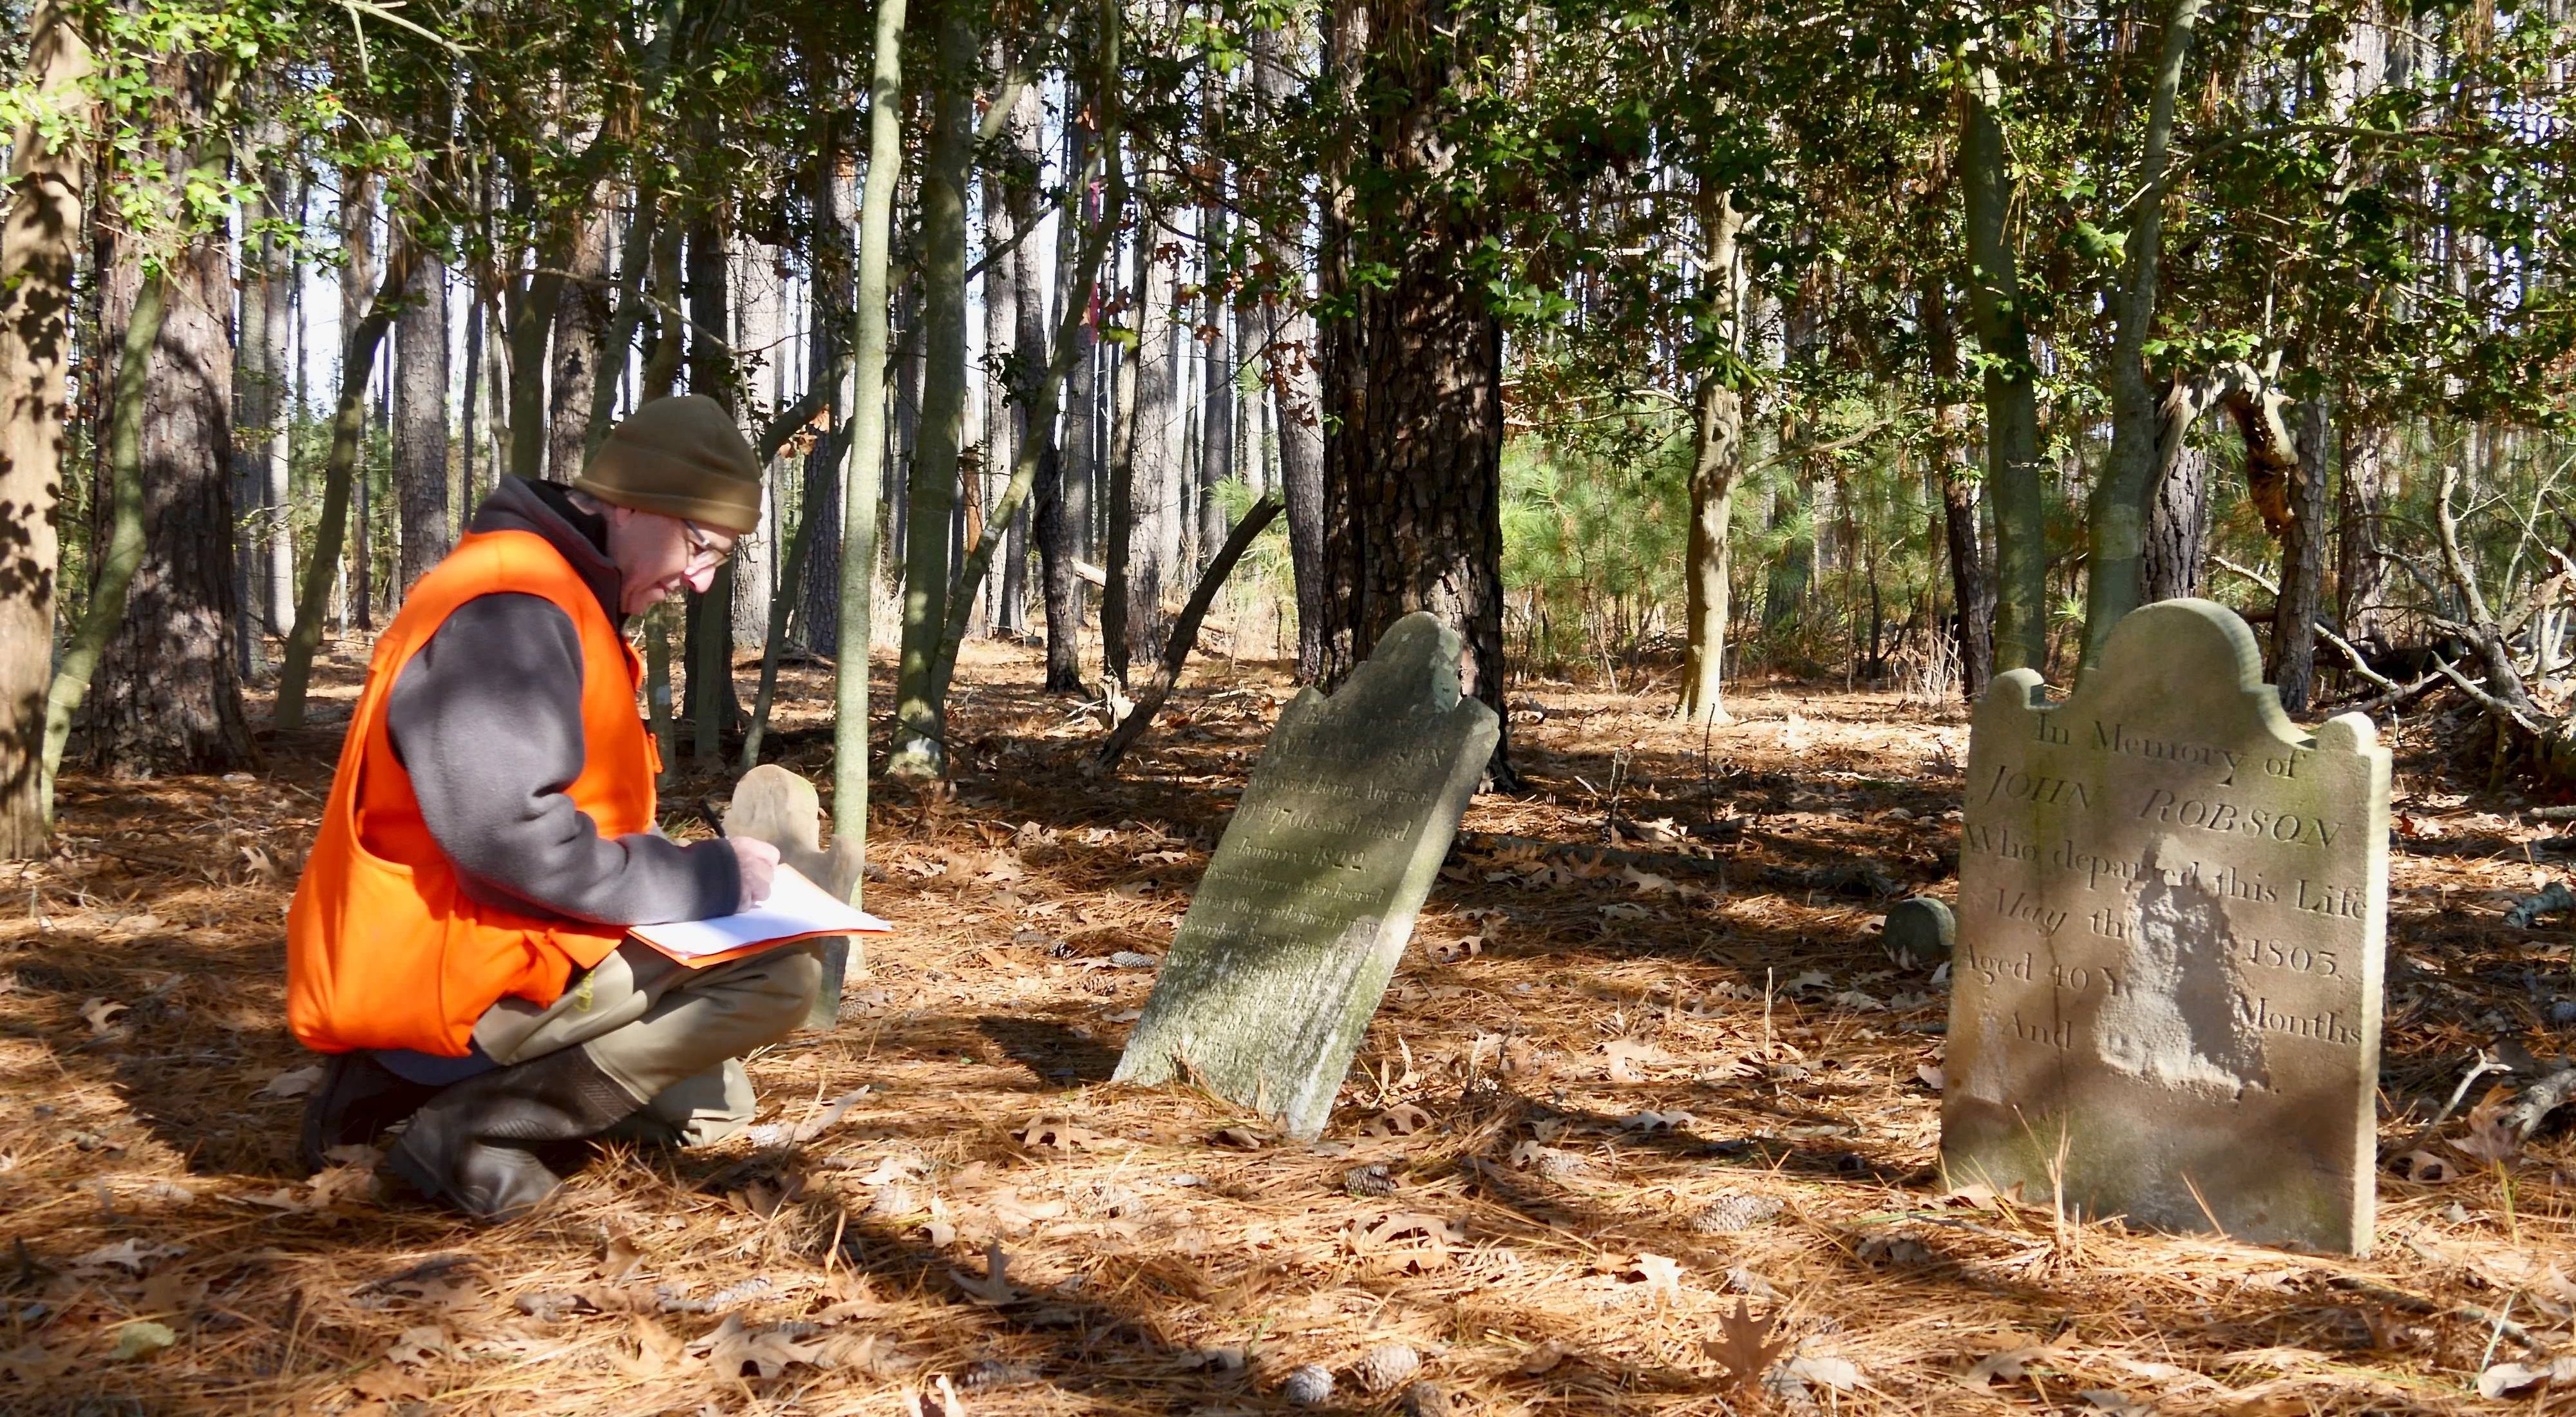 Man kneels with pen and paper in front of old tombstone in wooded area.